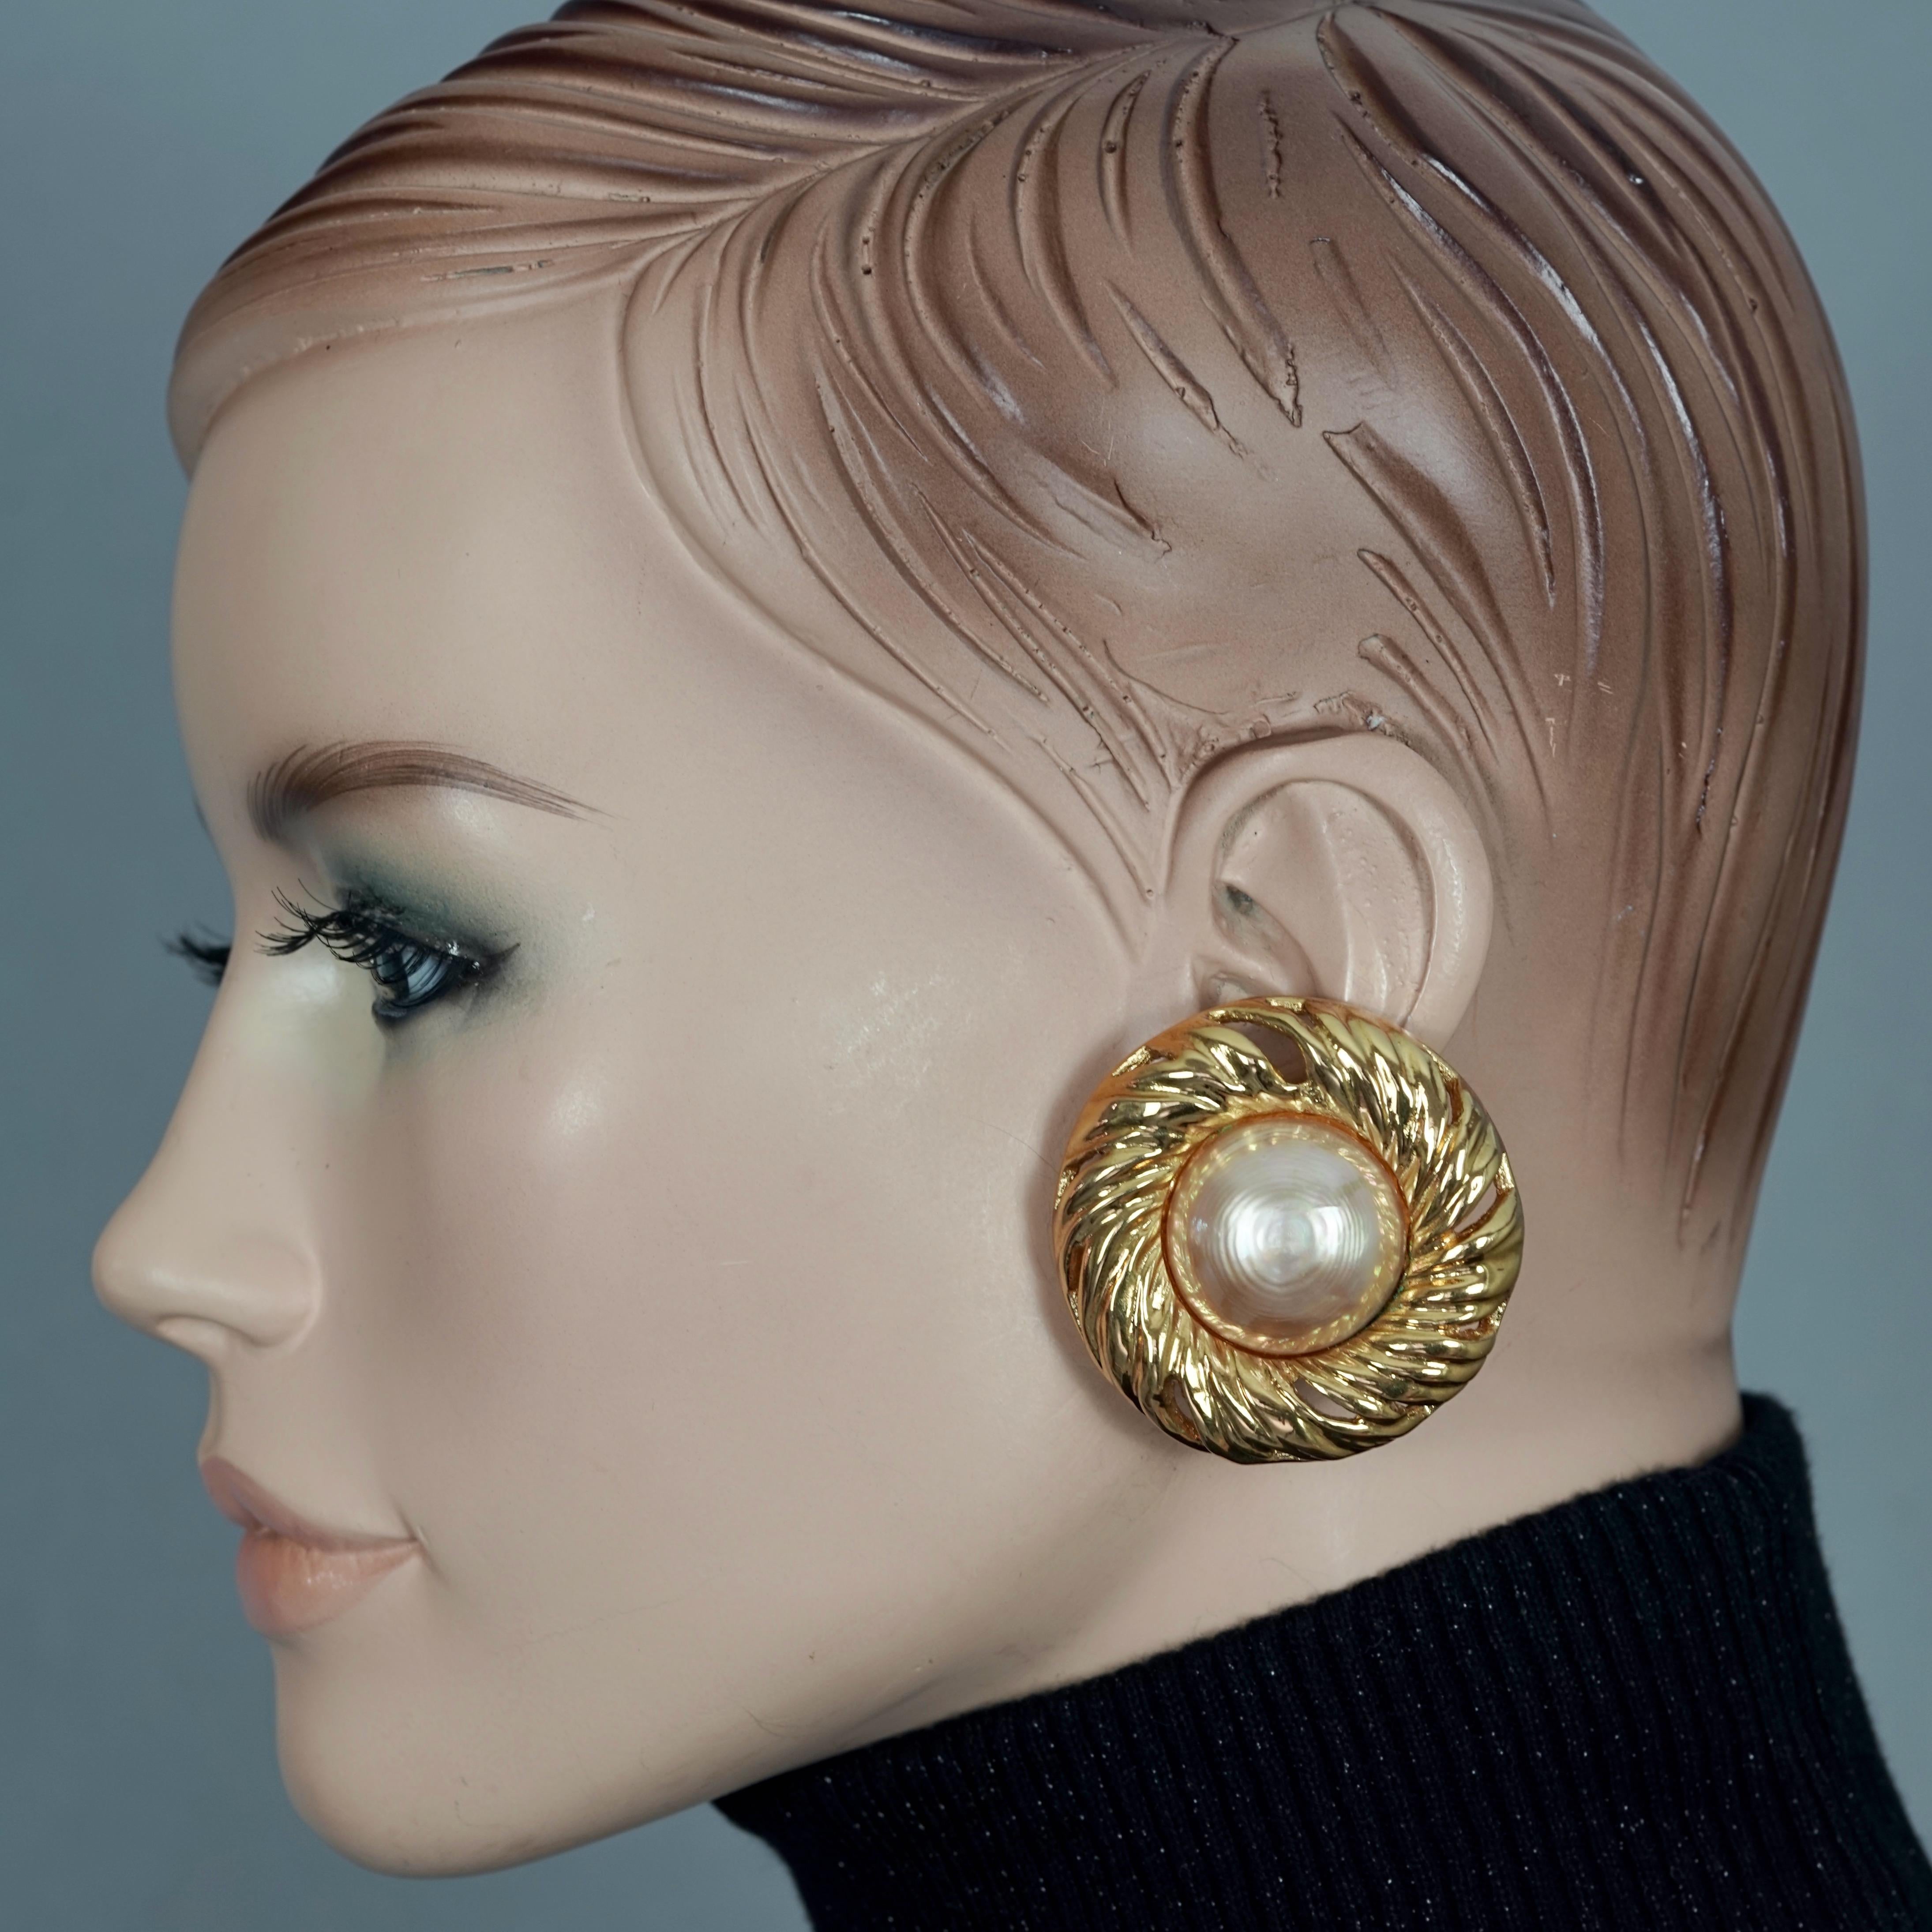 Vintage YVES SAINT LAURENT Ysl by Robert Goossens Pearl Swirl Disc Earrings

Measurements:
Height: 1.85 inches (4.7 cm)
Width: 1.85 inches (4.7 cm)
Weight per Earring: 28 grams

Features:
- 100% Authentic YVES SAINT LAURENT by Robert Goossens.
-